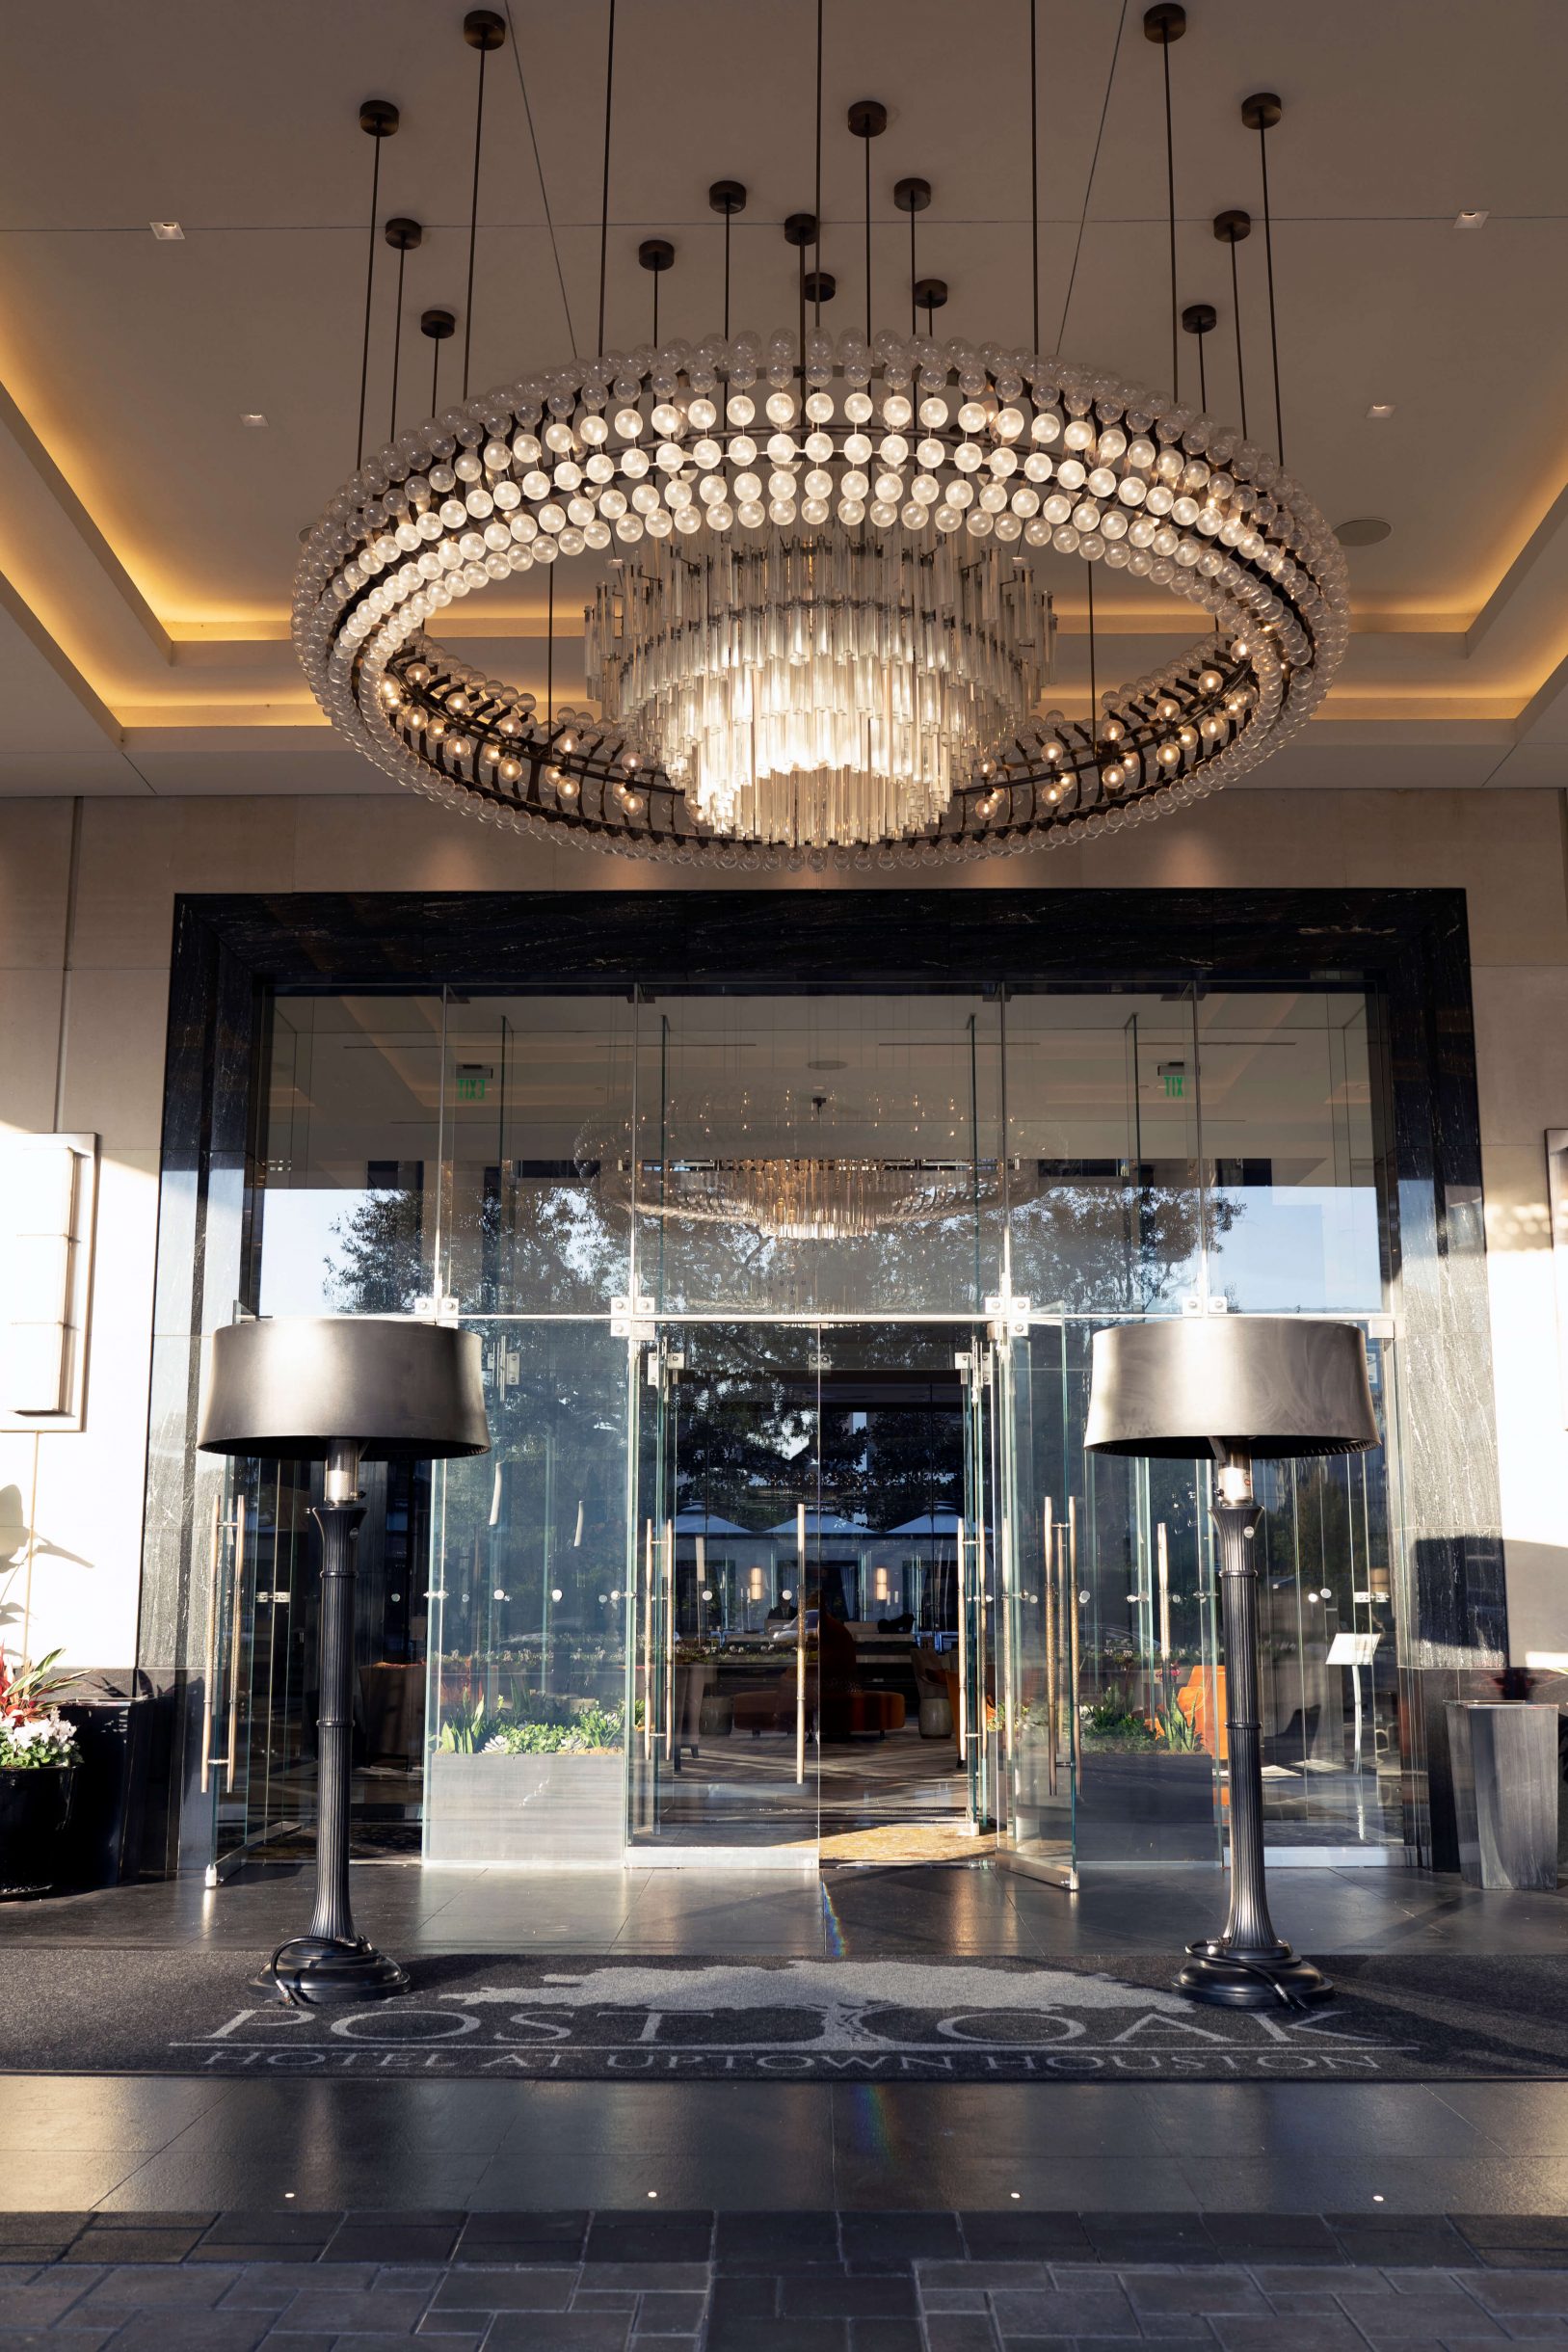 entrance of the post oak hotel at uptown in houston, texas. It has an enourmous circular chandelier, with a rug that has post oak hotel written on it with their emblem (an oak tree). there are two large lampshade lighting flanked to the side.